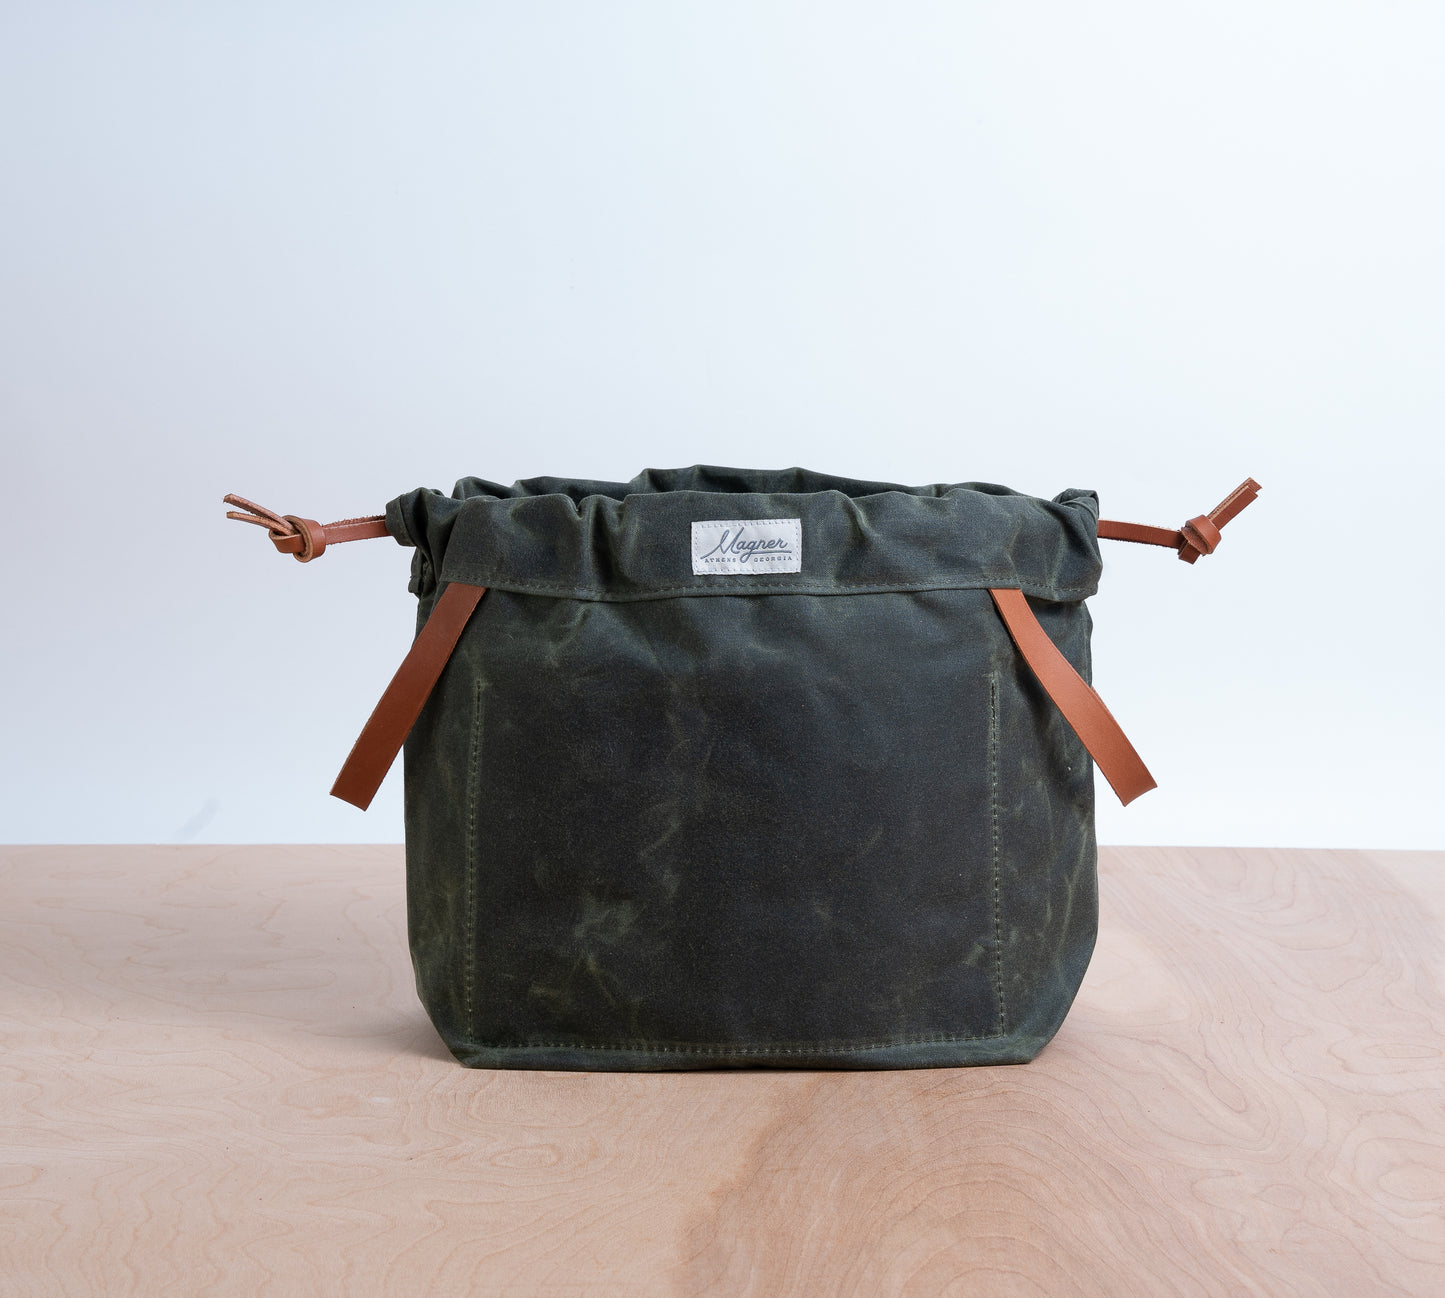 Magner Co. Bags